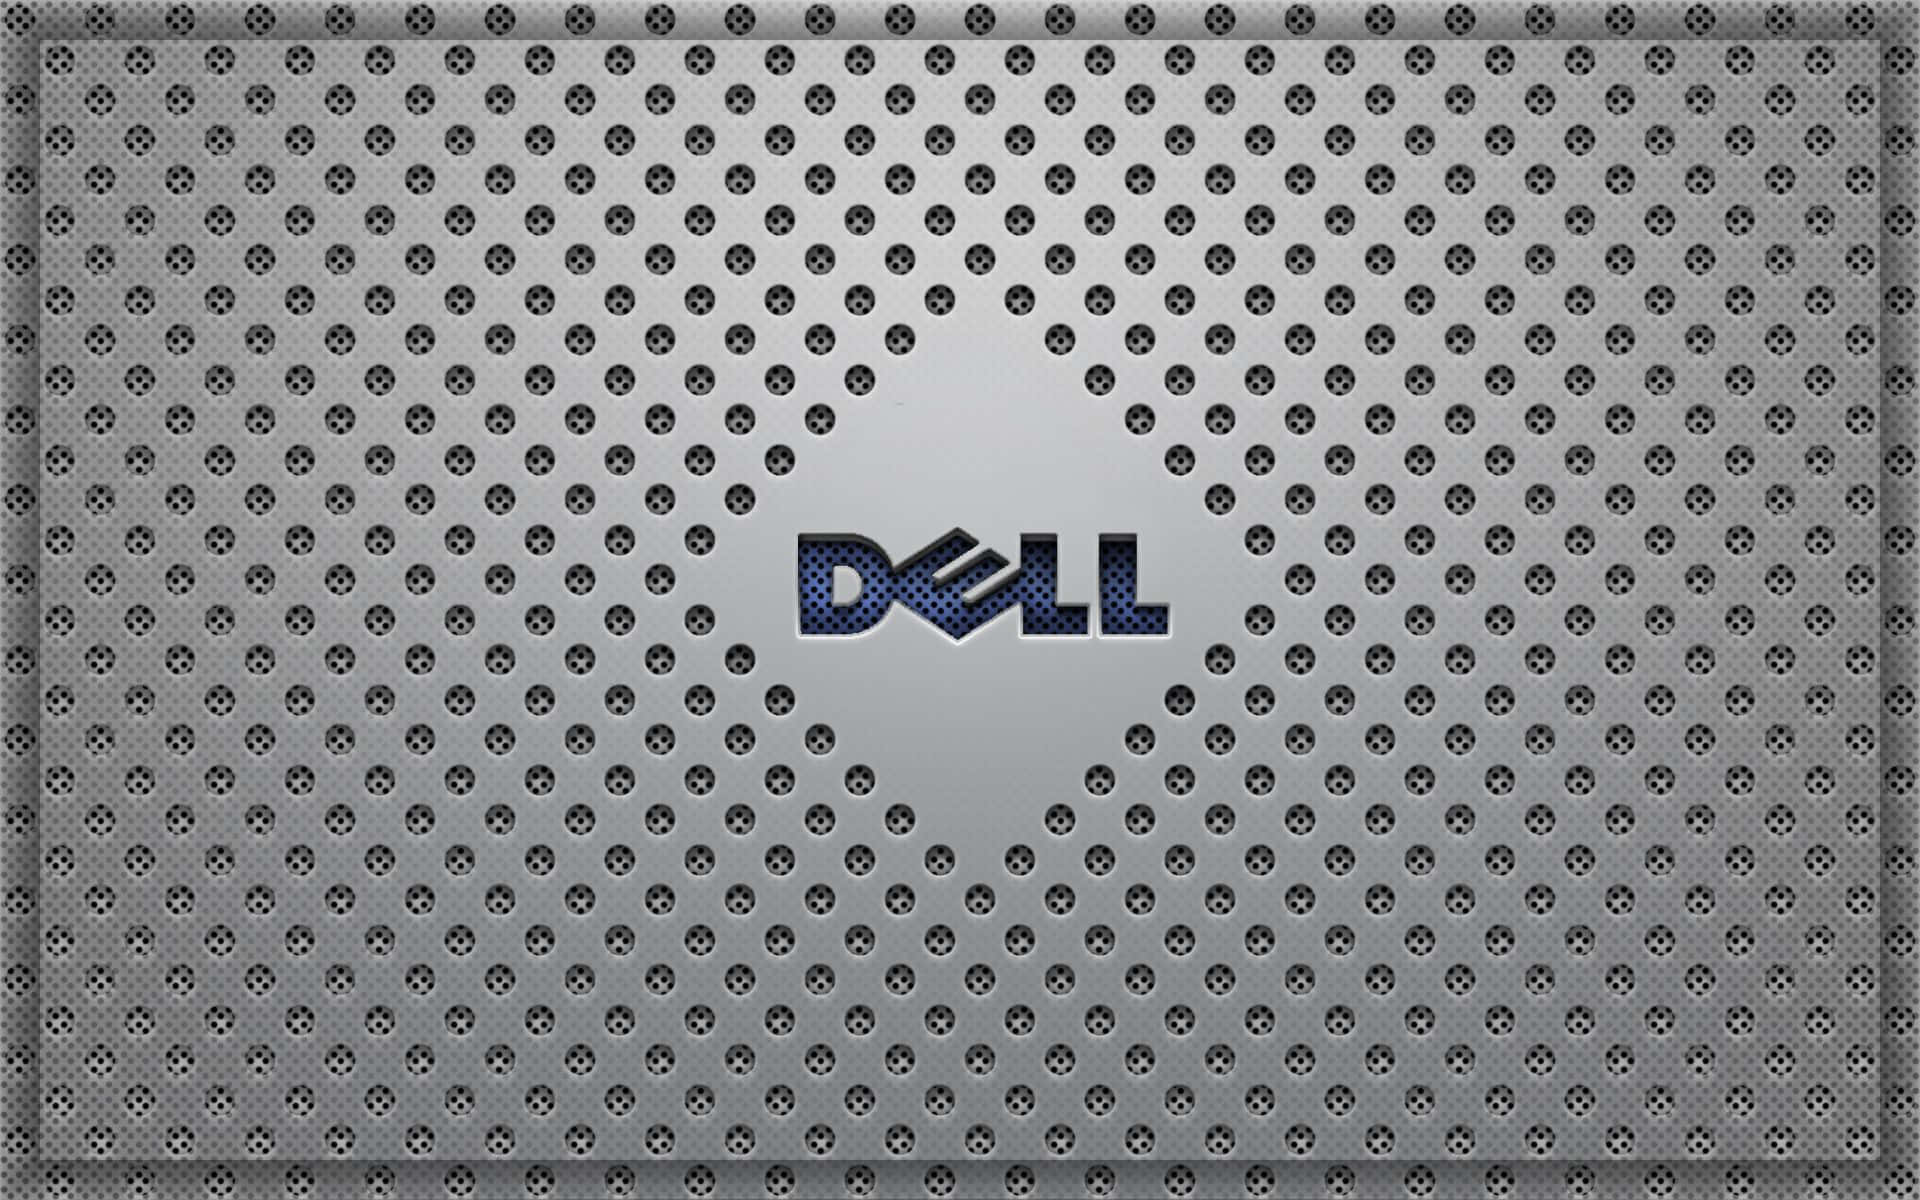 Experience the Power and Performance of Dell